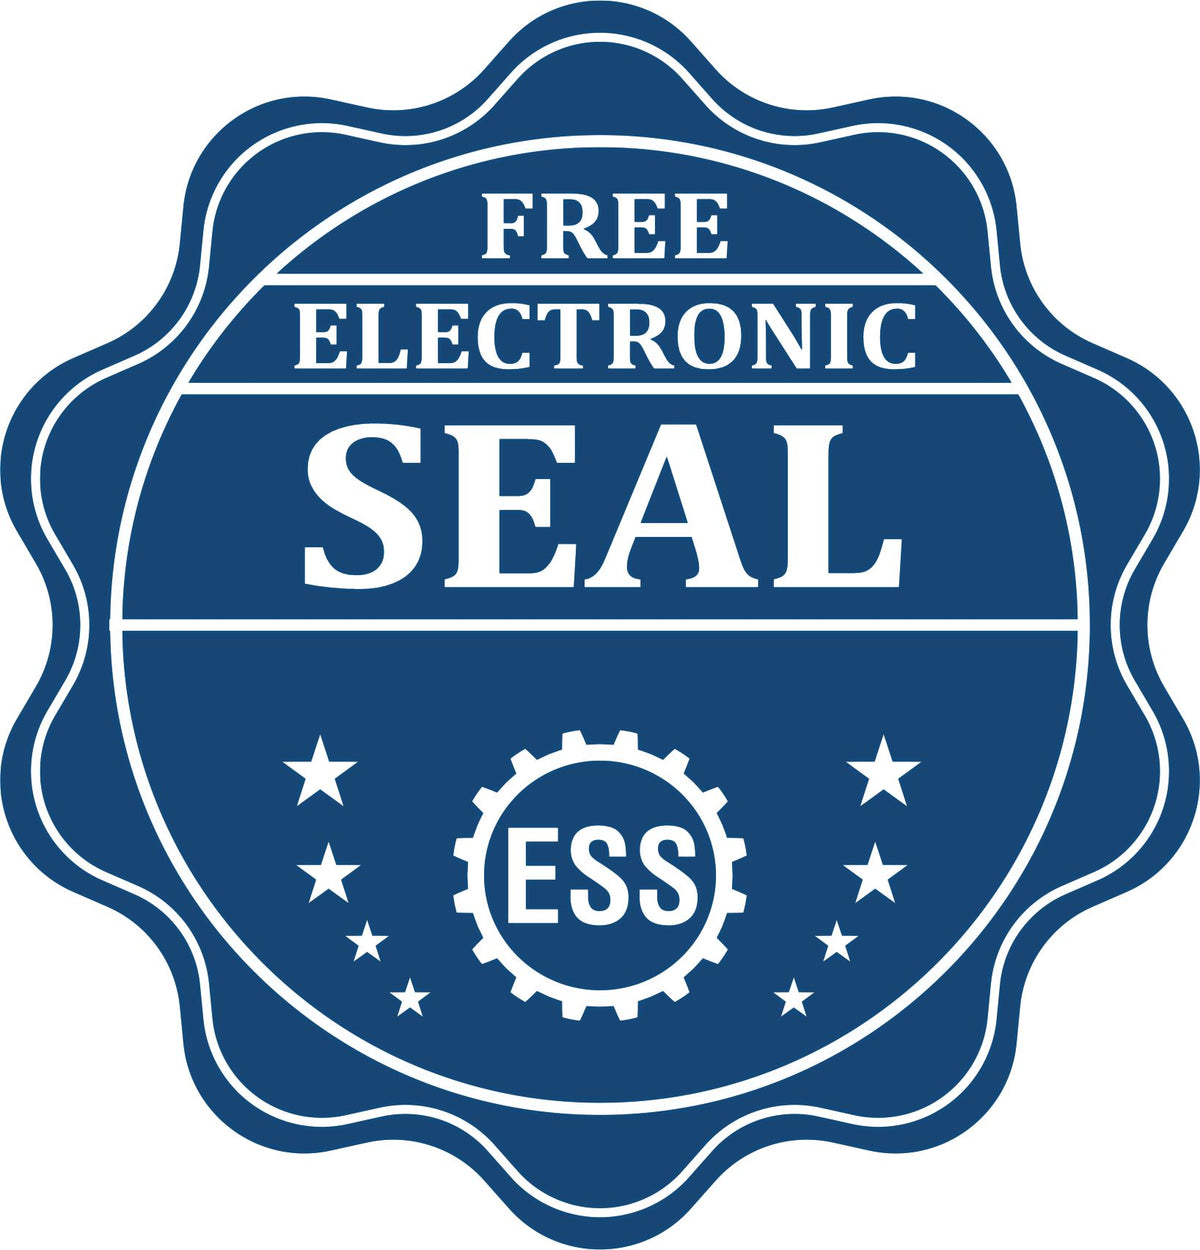 A badge showing a free electronic seal for the MaxLight Premium Pre-Inked Indiana Rectangular Notarial Stamp with stars and the ESS gear on the emblem.